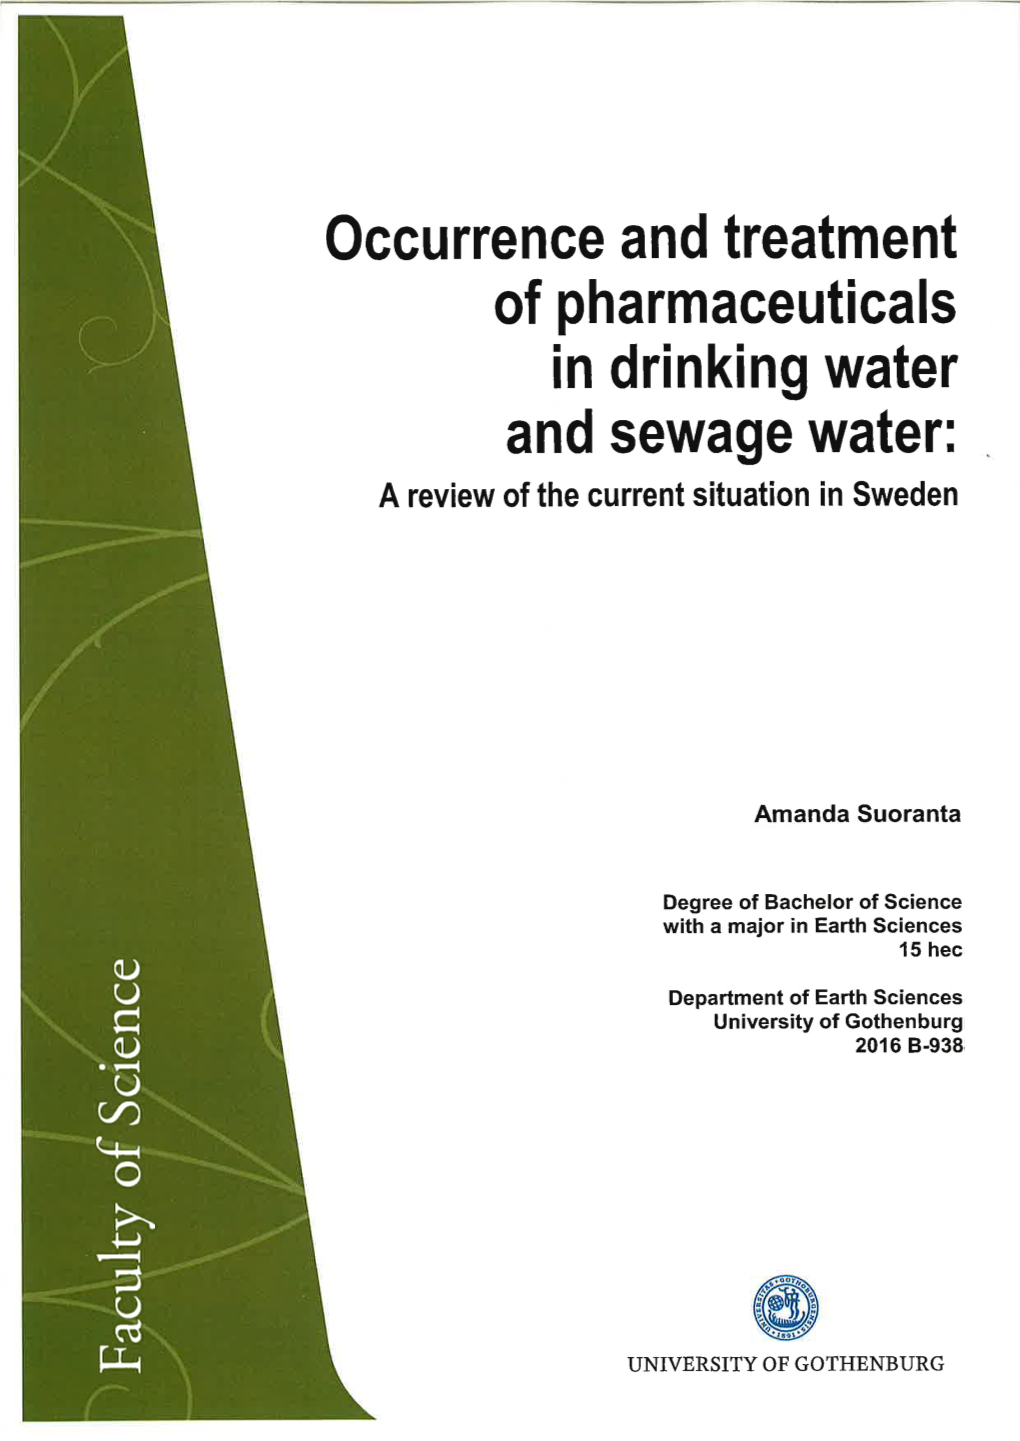 Occurrence and Treatment of Pharmaceuticals in Drinking Water